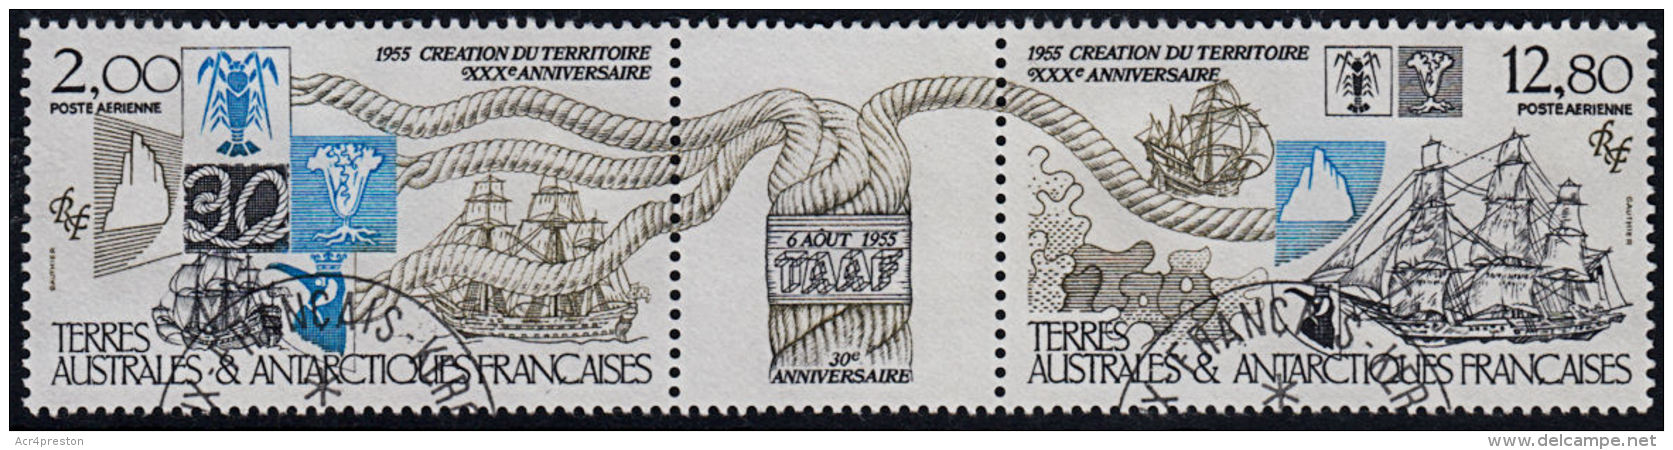 D0261 TAAF (French Antarctic Territories) 1985, SG 206-7 30th Anniv French Antarctic Territories,  Used - Used Stamps